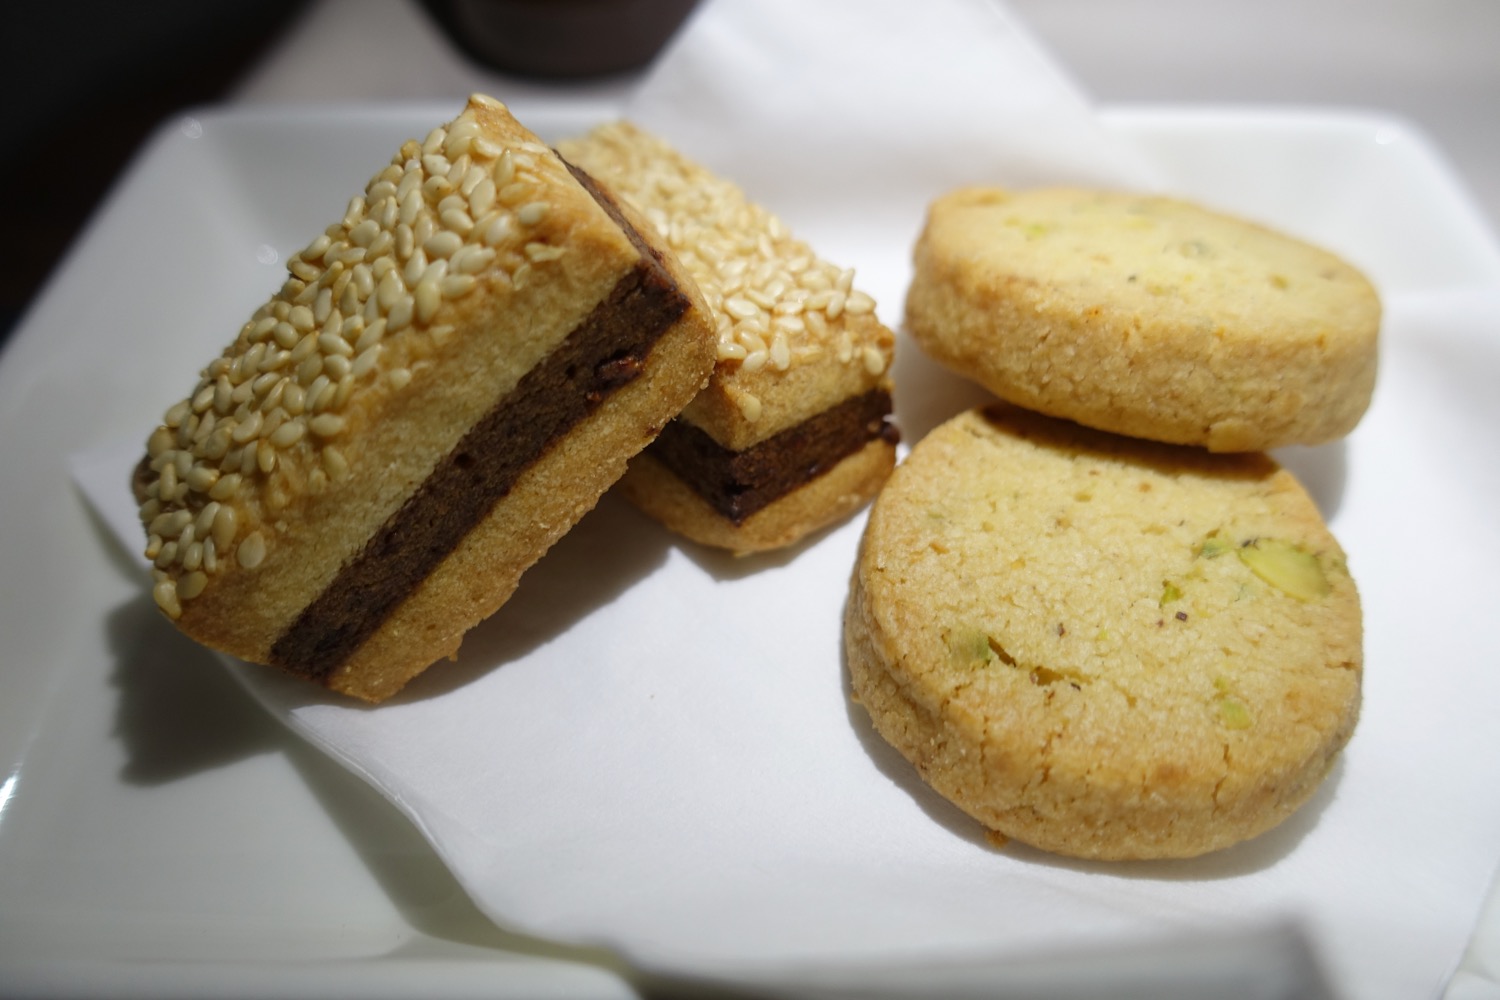 a plate of cookies and a sandwich